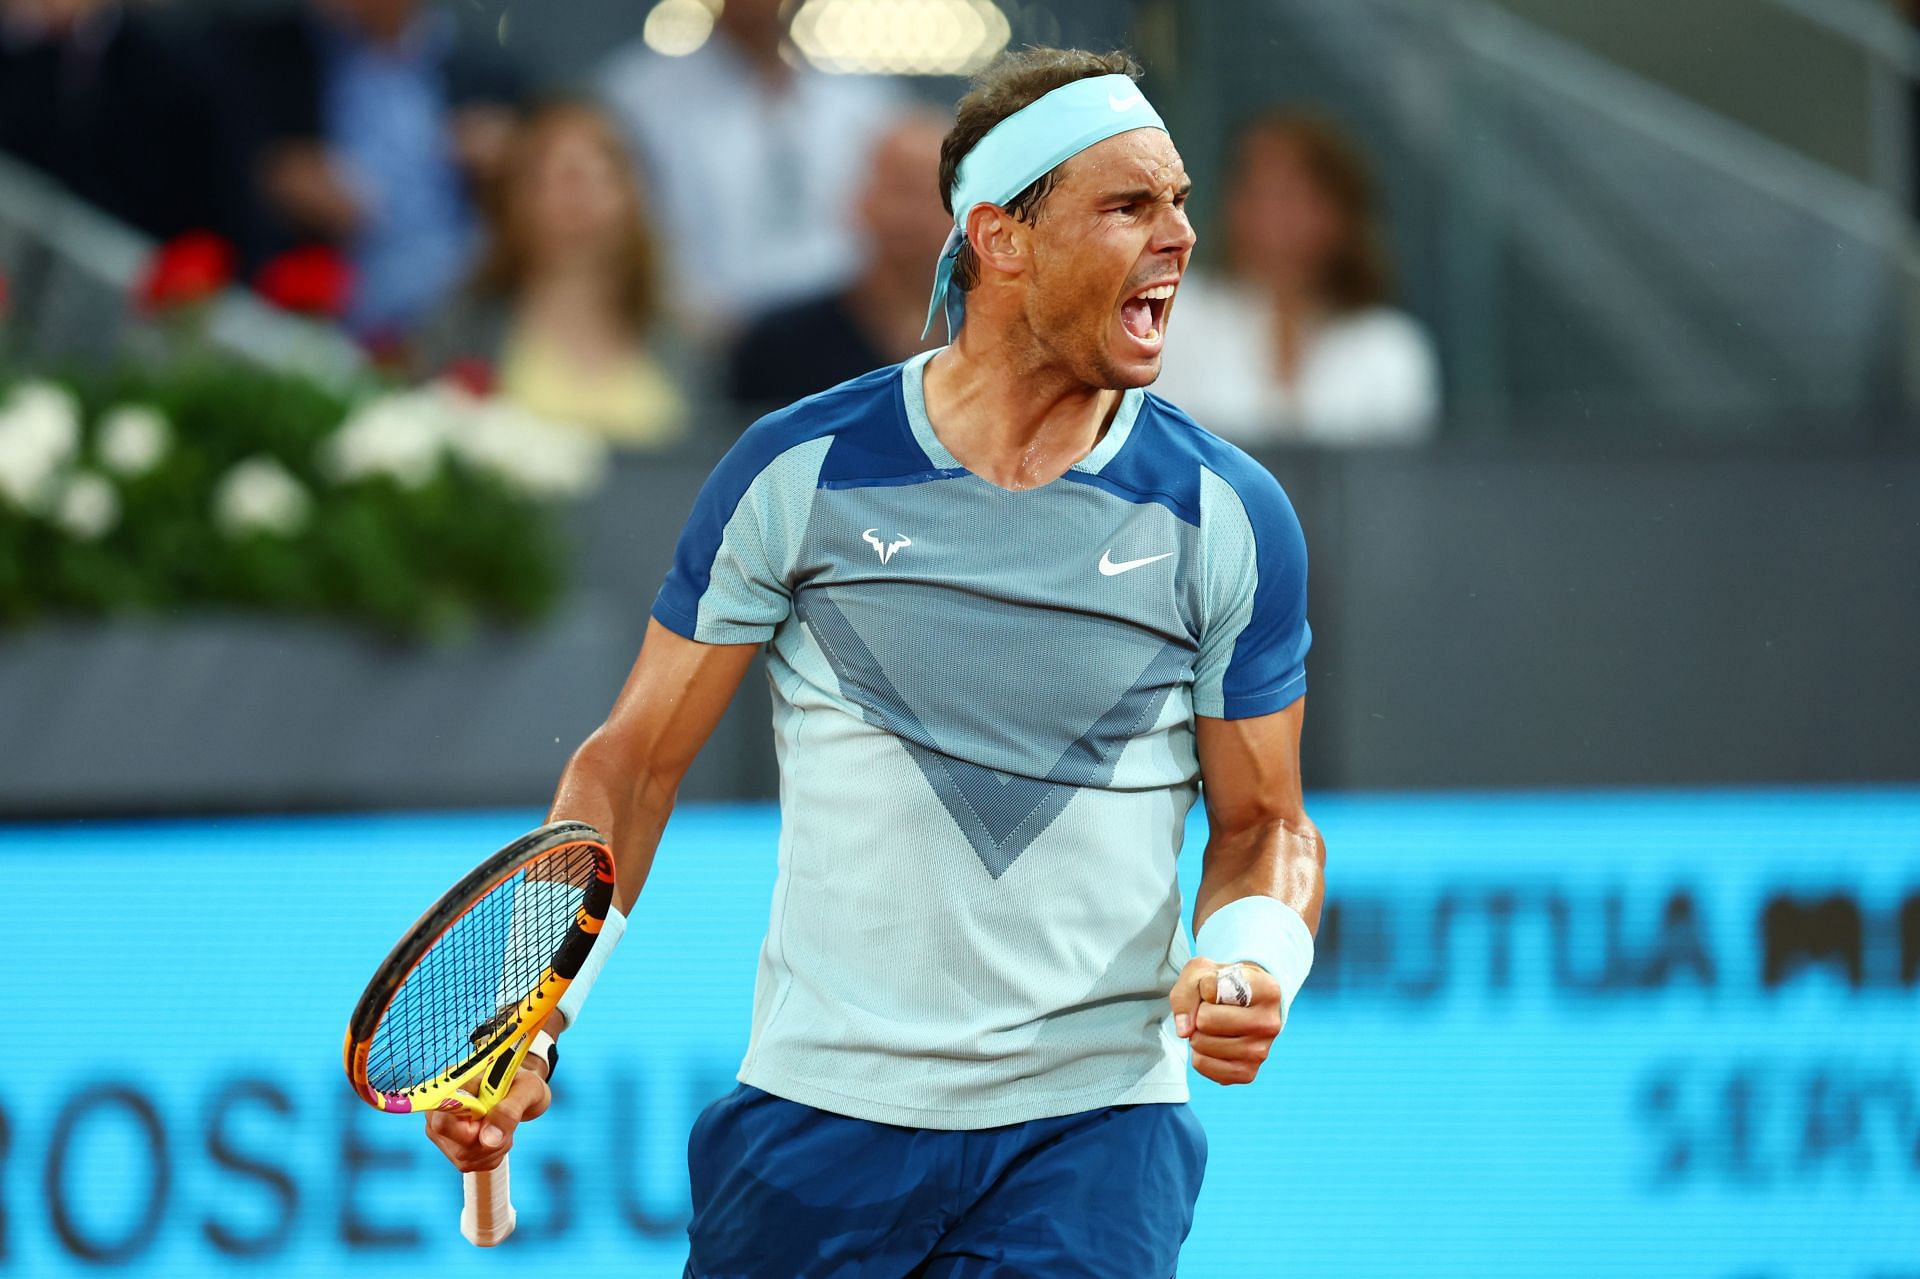 Rafael Nadal will be in action on Day 6 of the Italian Open.